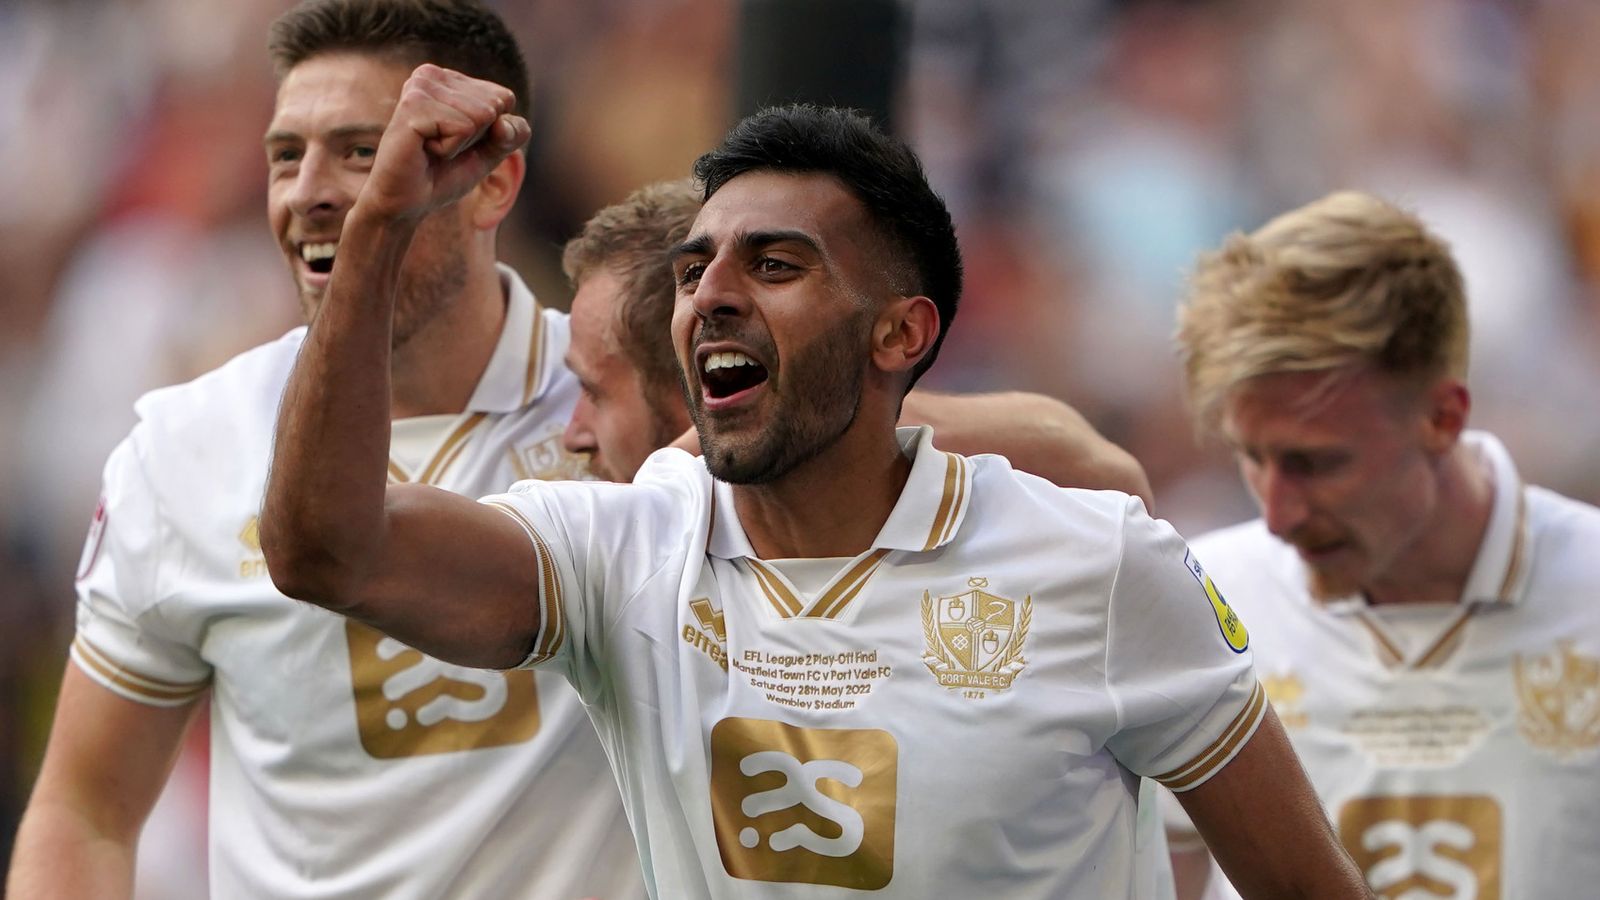 Port Vale play-off hero Mal Benning a pioneer for British South Asians in footba..